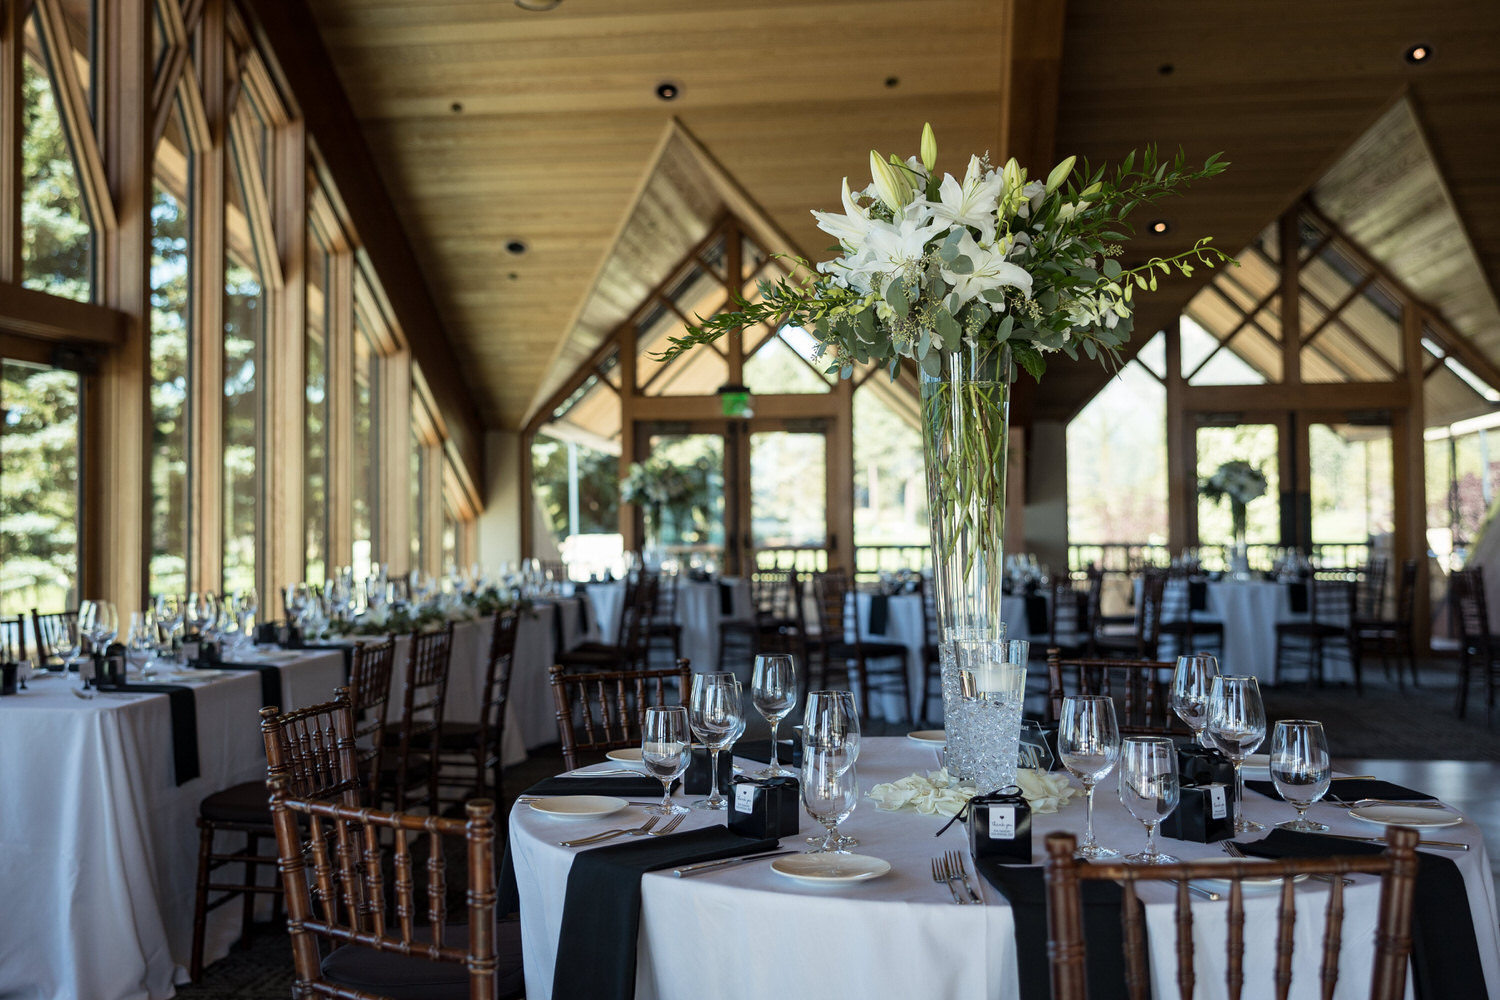 Tall glass reception table centerpieces with white flowers and black napkins at a North Room wedding reception.